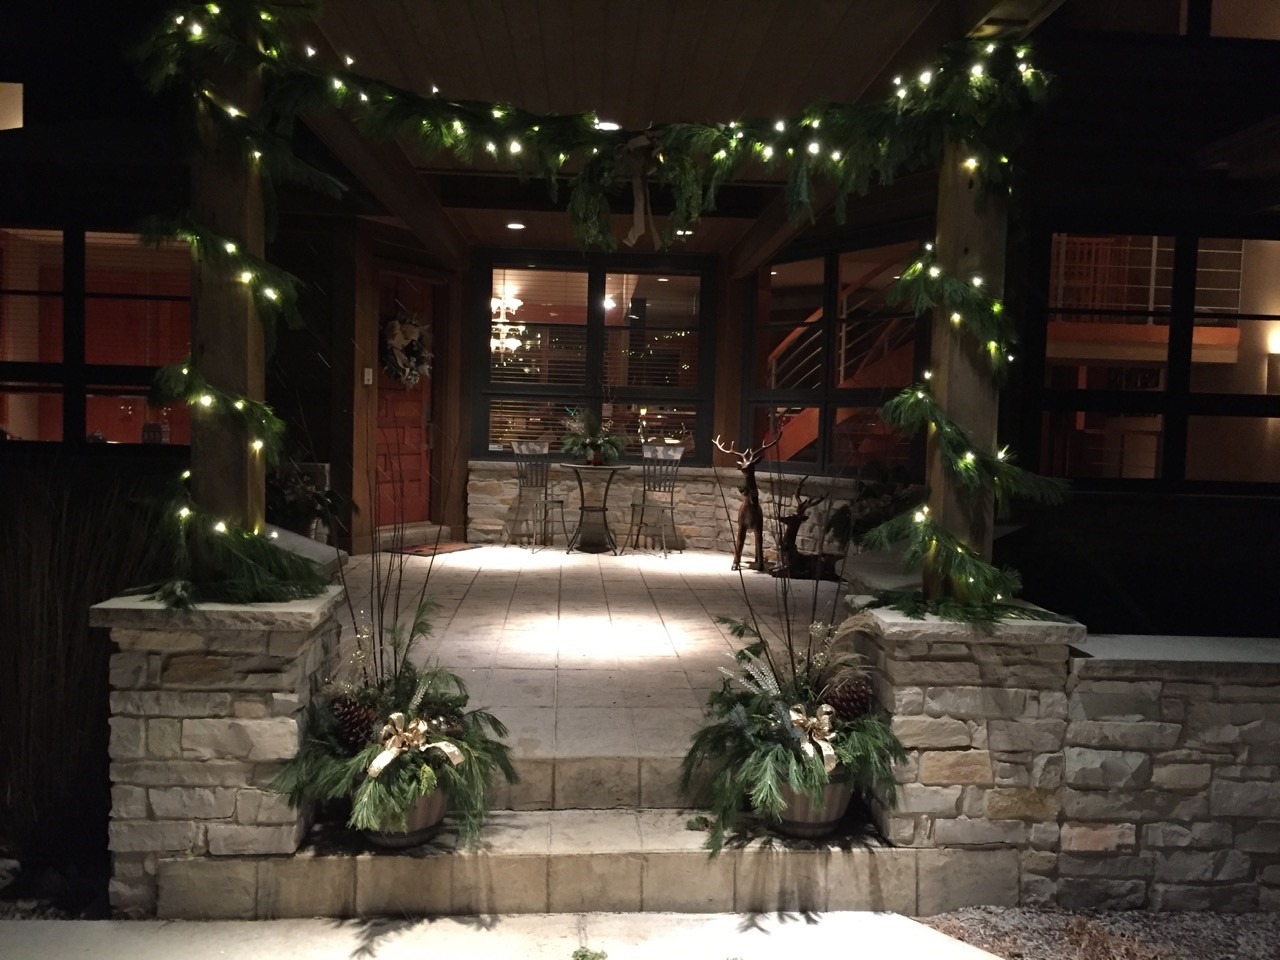 An inviting entrance adorned with festive lights, garlands, and holiday plants, captured during the evening, exudes warmth and seasonal cheer.